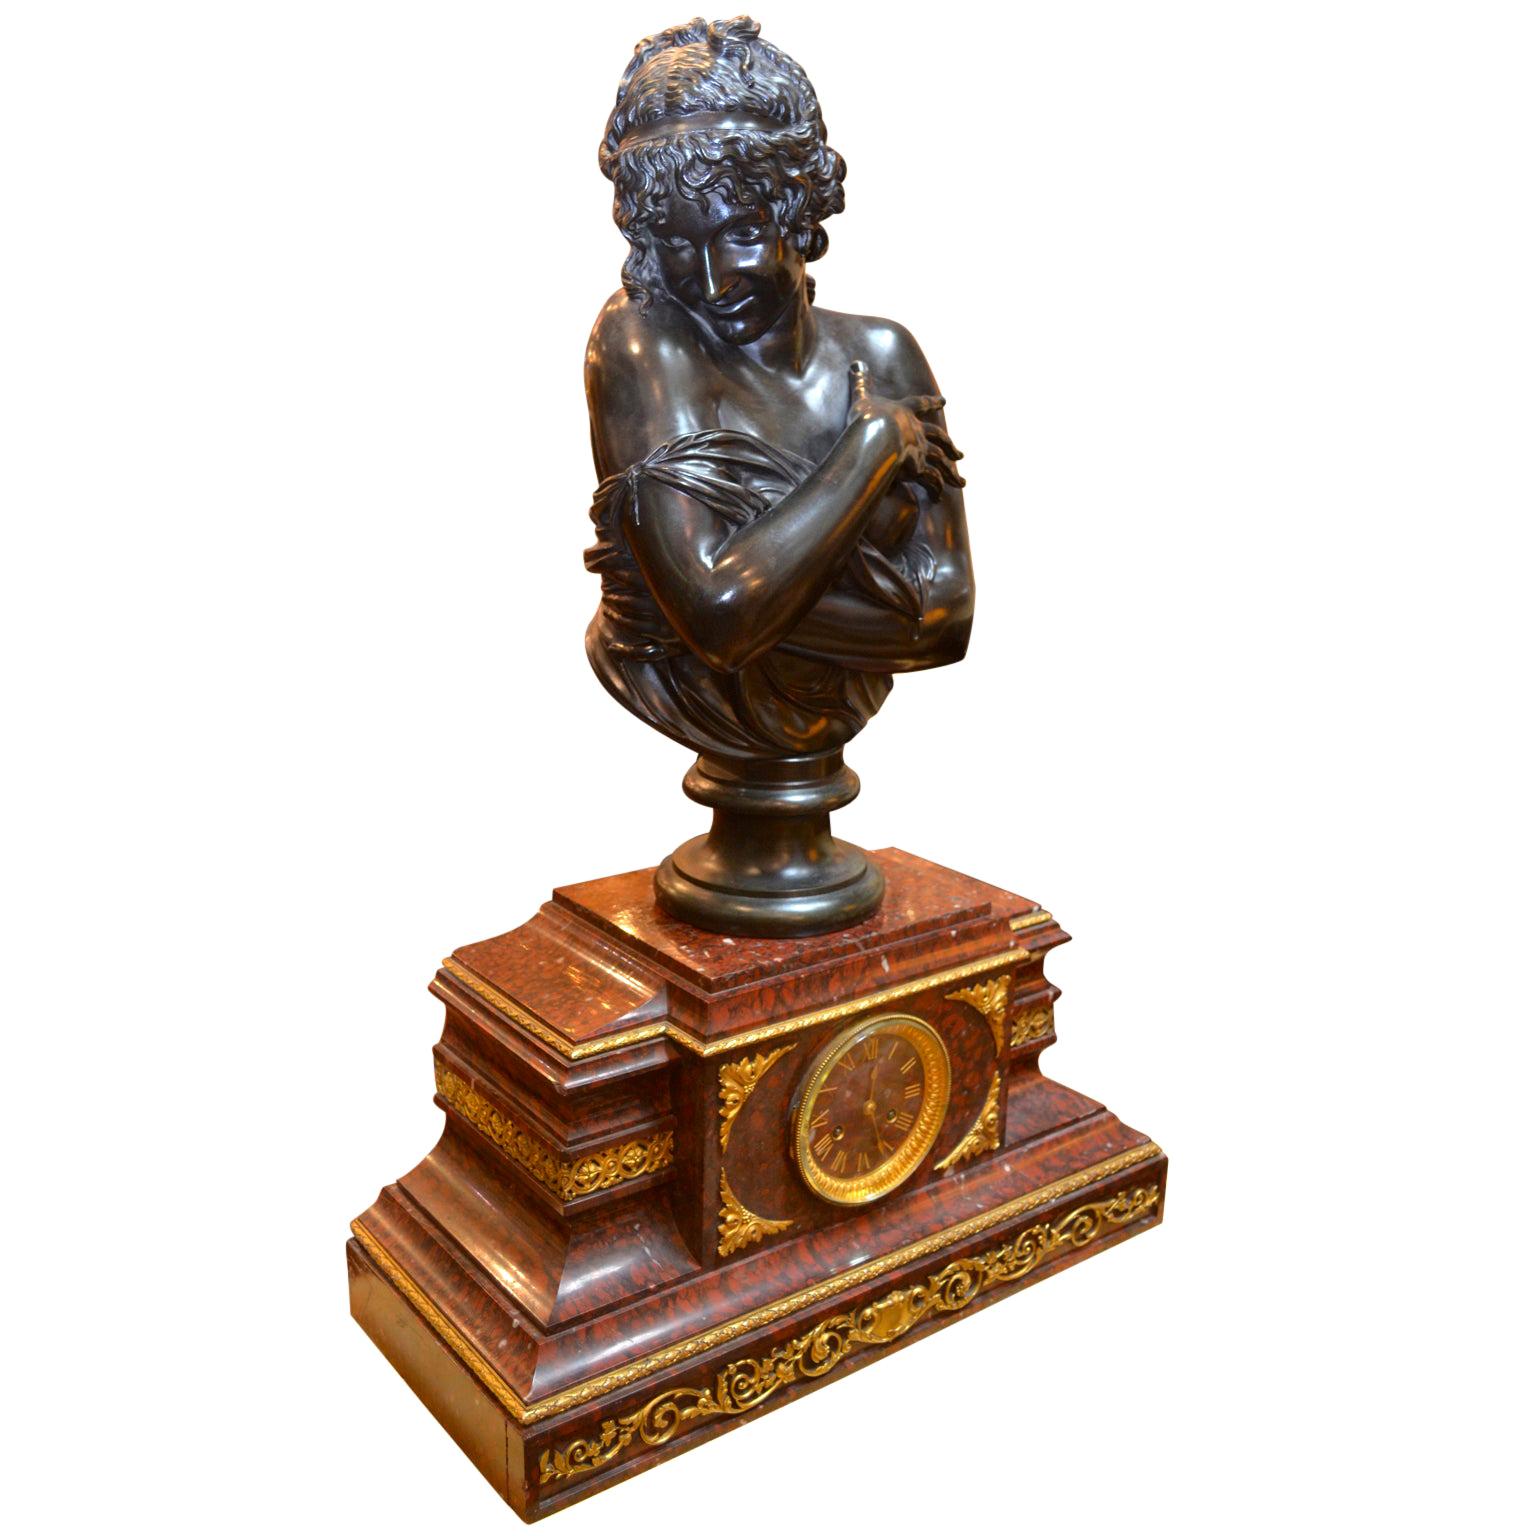 A finely cast gilt bronze clock base mounted with of a classical patinated bronze bust of a maiden after a model by James Pradier. The maiden has her curly haired head turned demurely to one side resting on her bare shoulders, and hands clasped